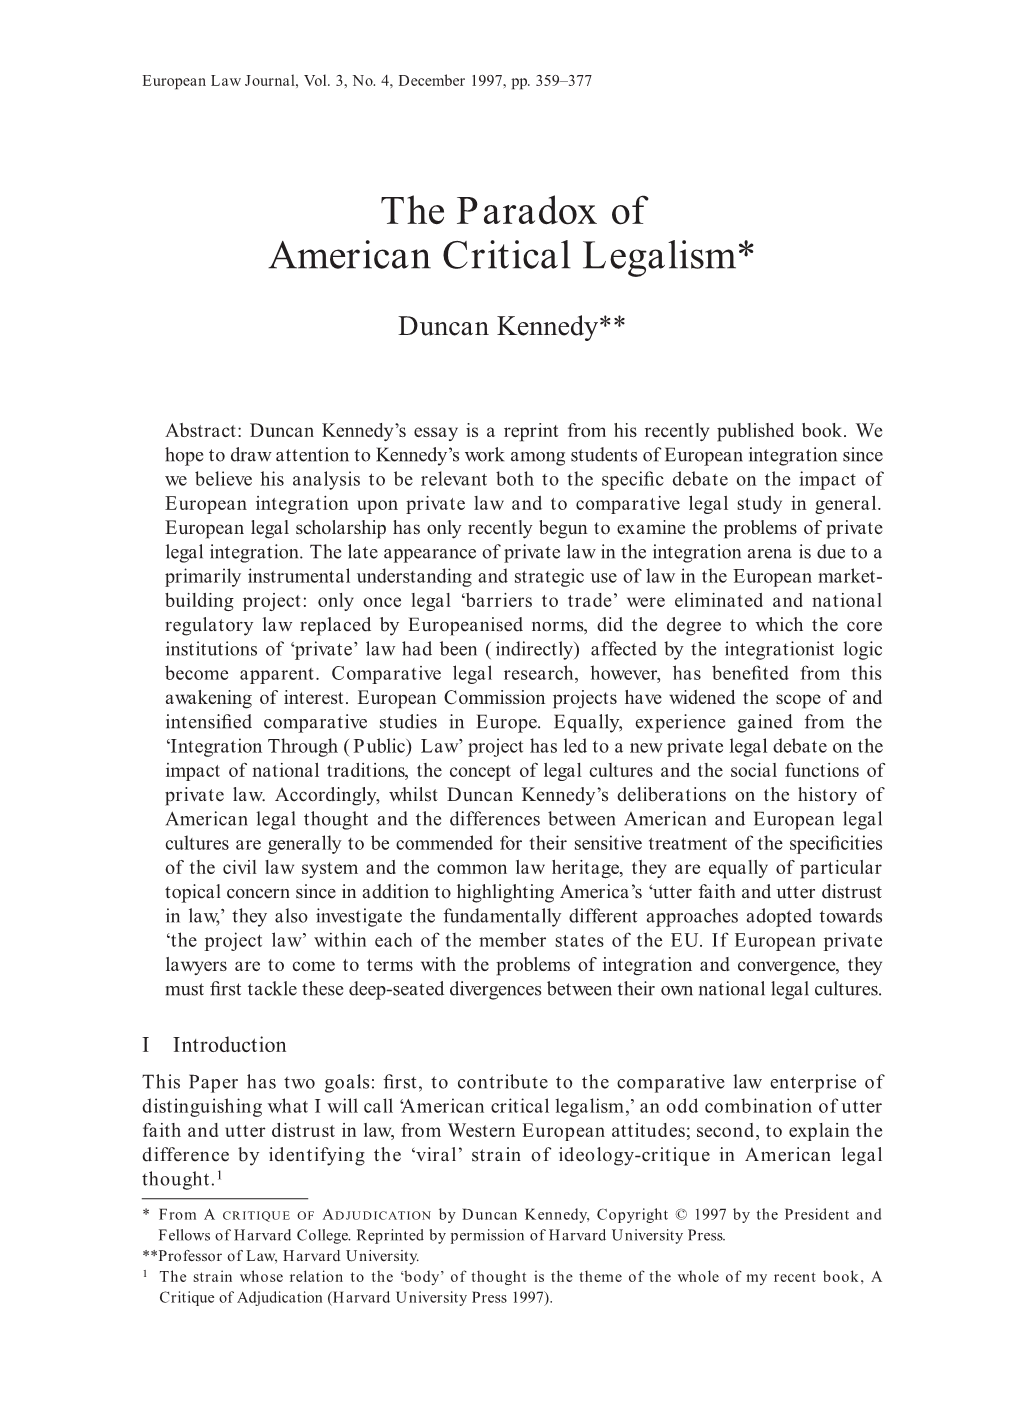 The Paradox of American Critical Legalism*